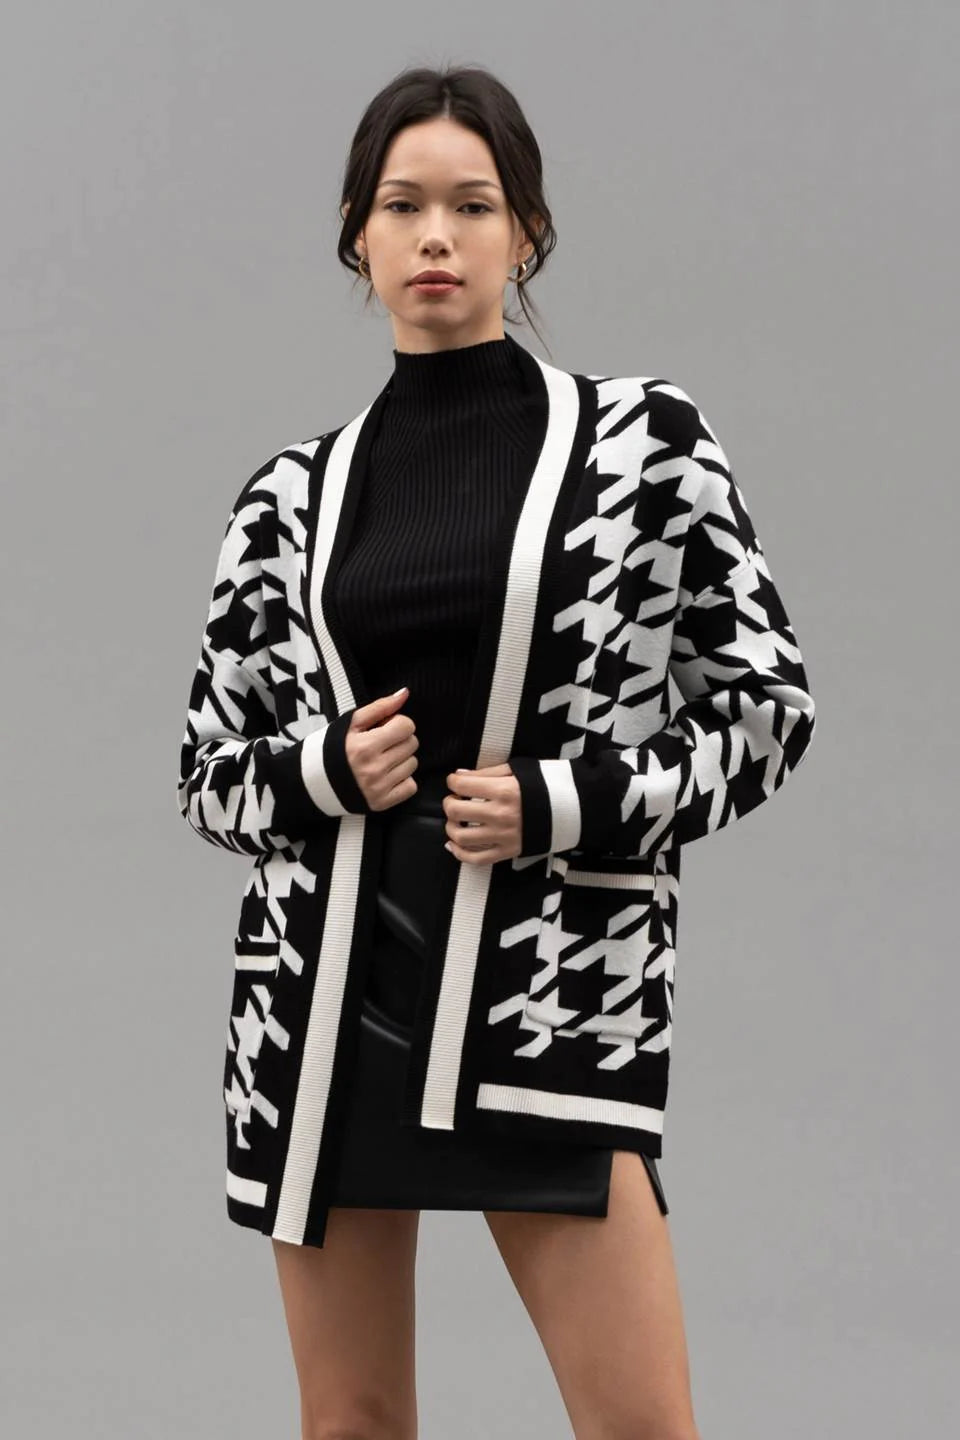 Blu Pepper Black and White Houndstooth Cardigan